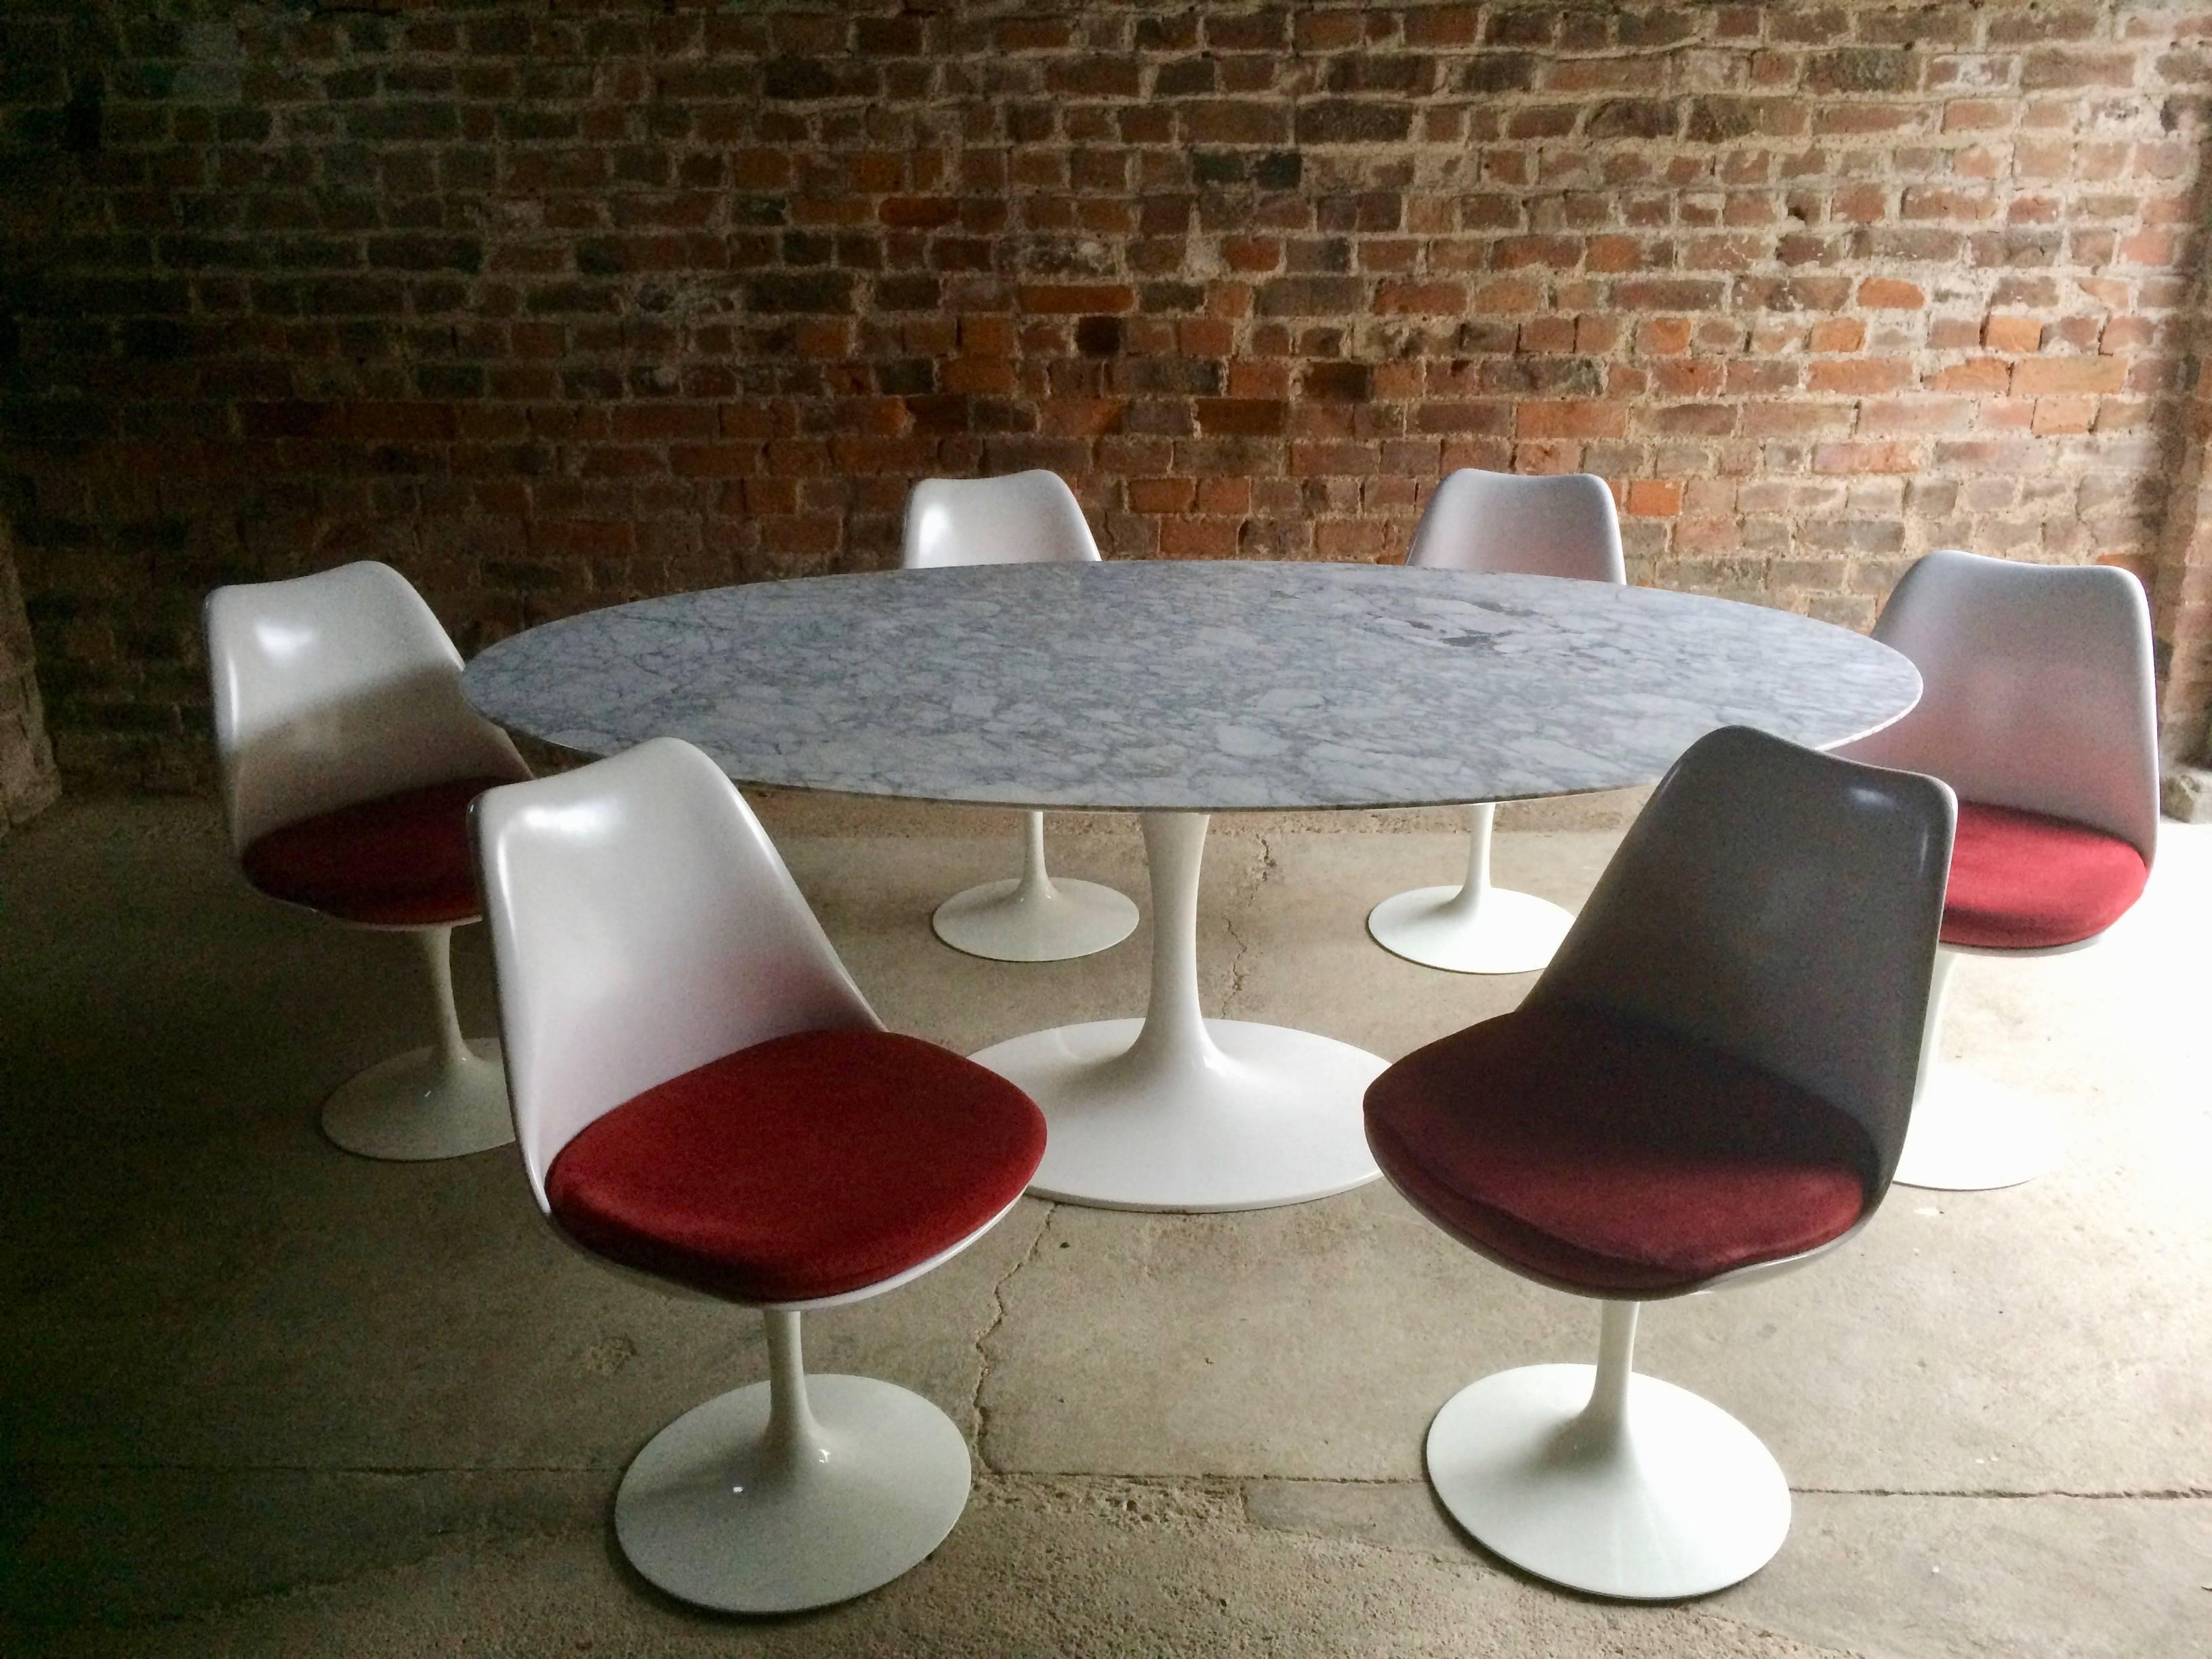 Original set of six Eero Saarinen for Knoll Studio Tulip dining Chairs and one Tulip oval Marble dining table, Florence Knoll was one of the great entrepreneurs of mid-century modern design, nne of her most enduring projects was this marble dining